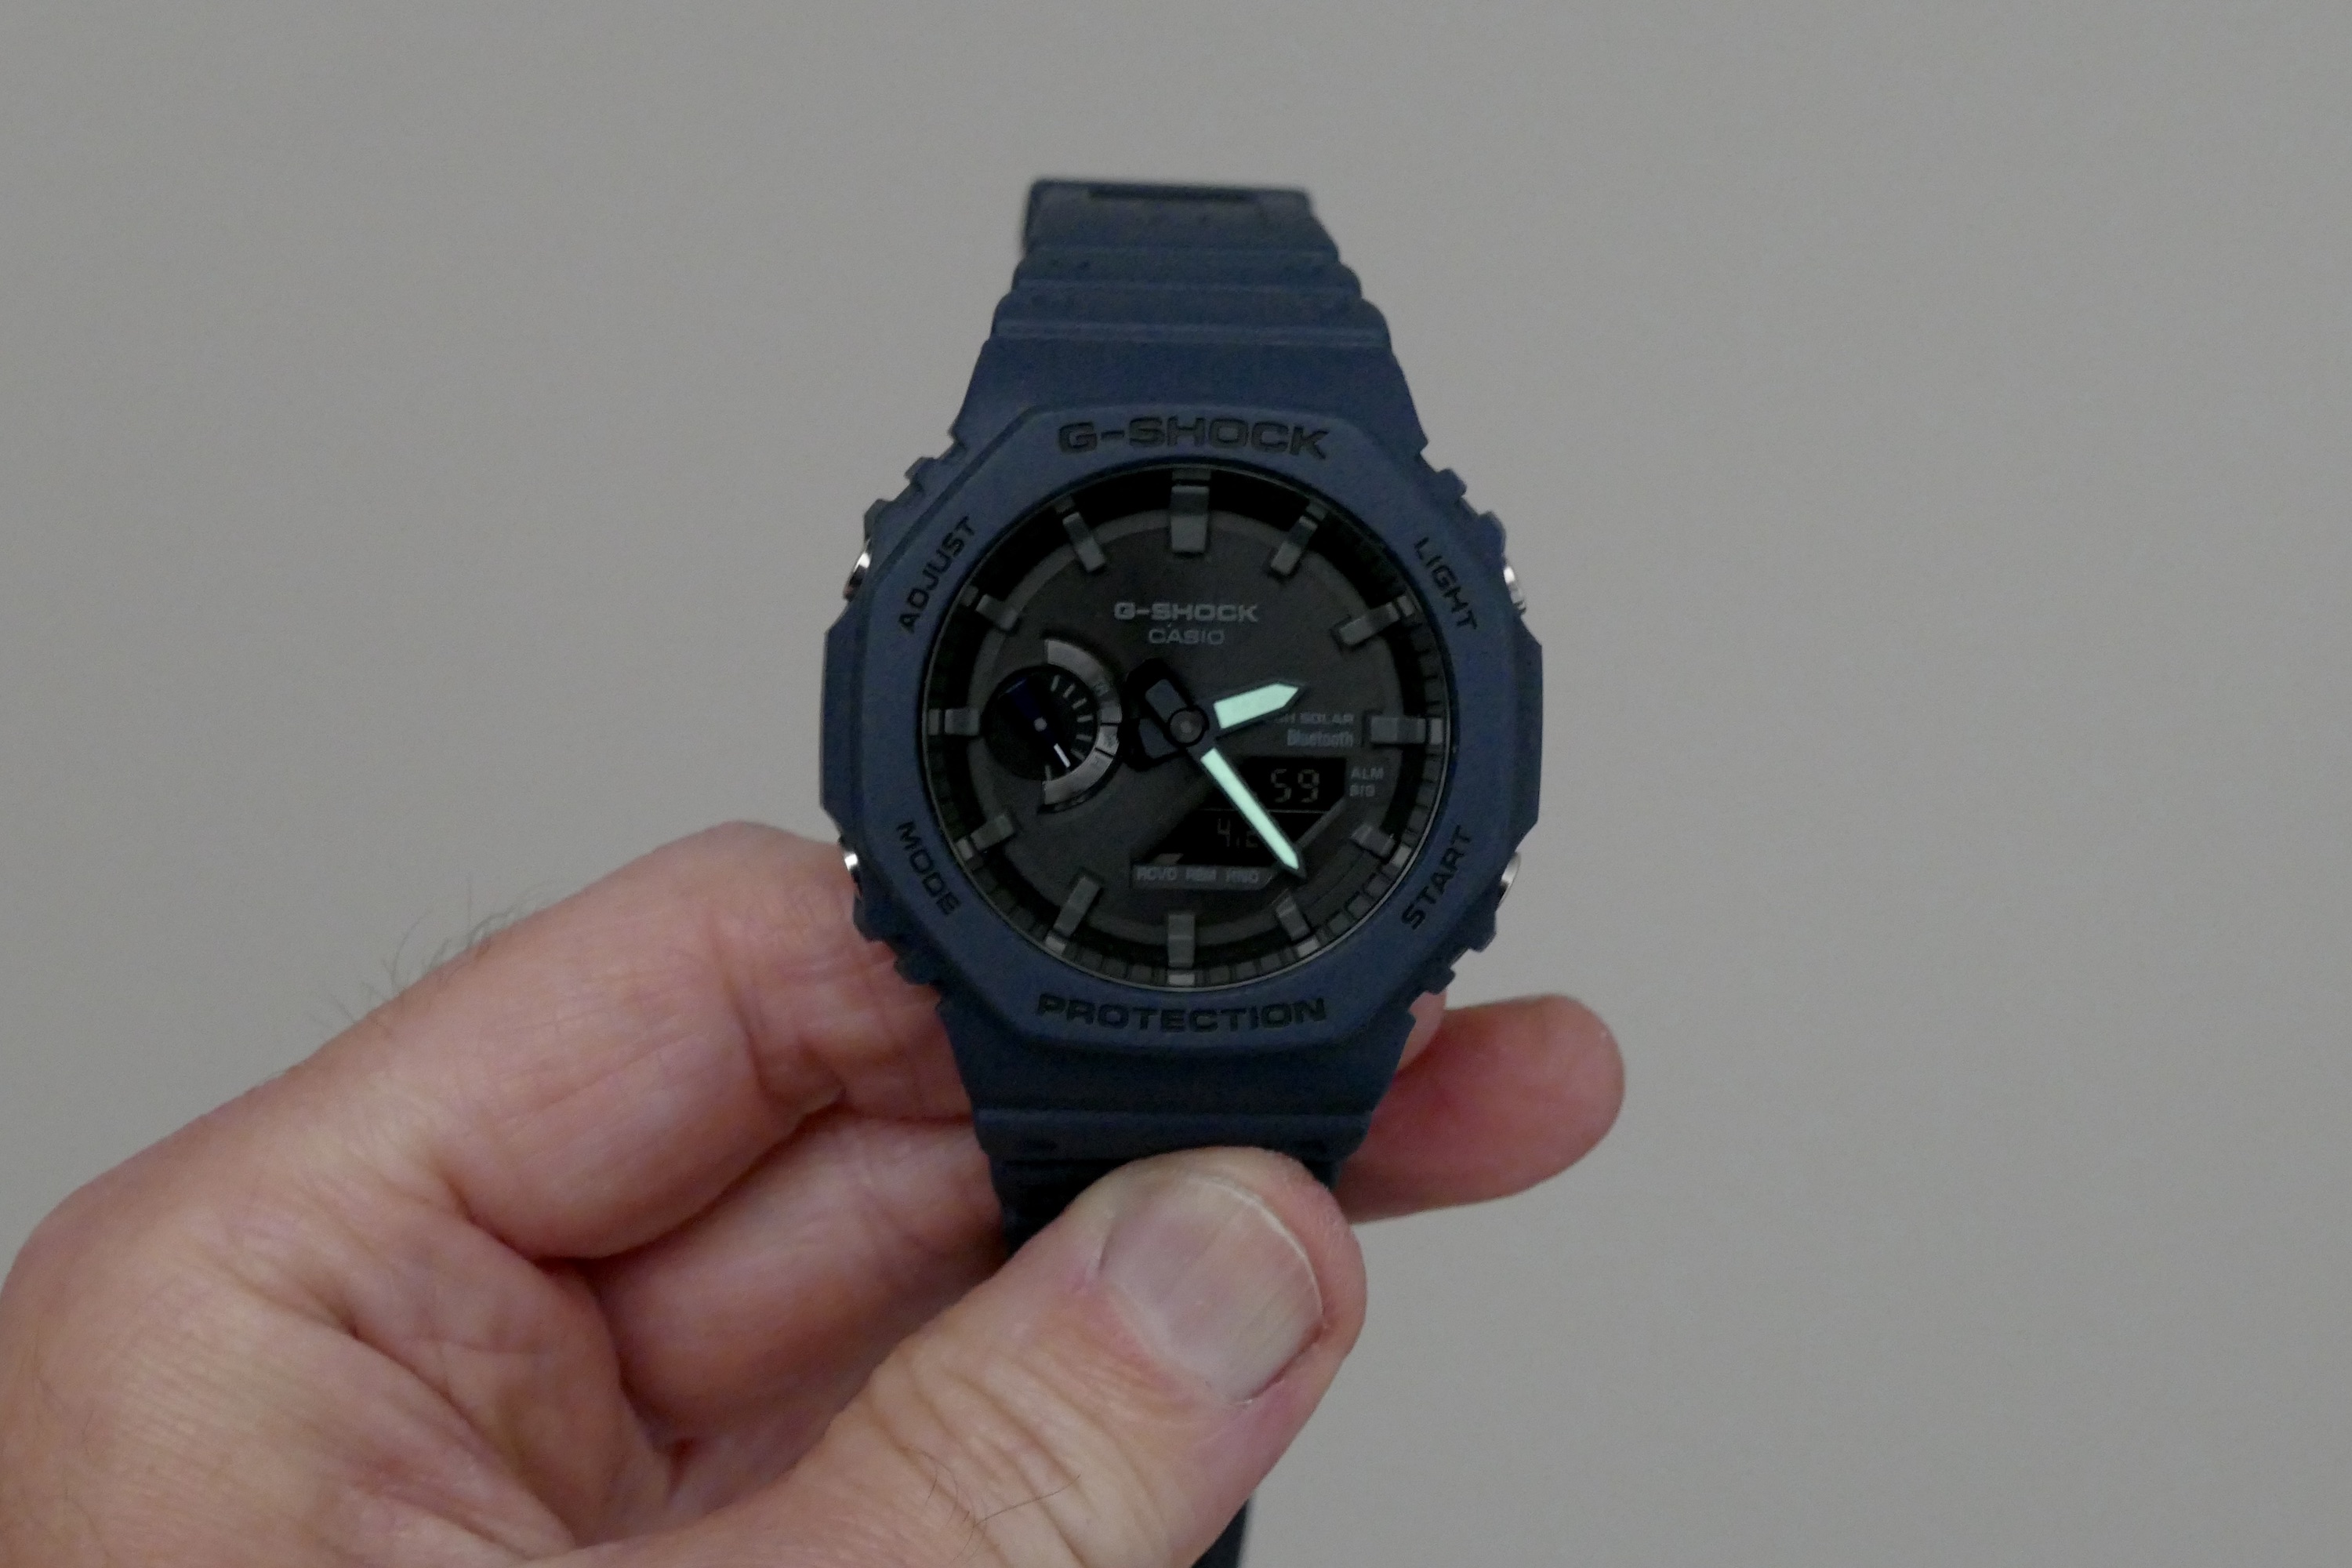 a | G-Shock tech-boosted is The watch buy great Digital Trends GA-B2100